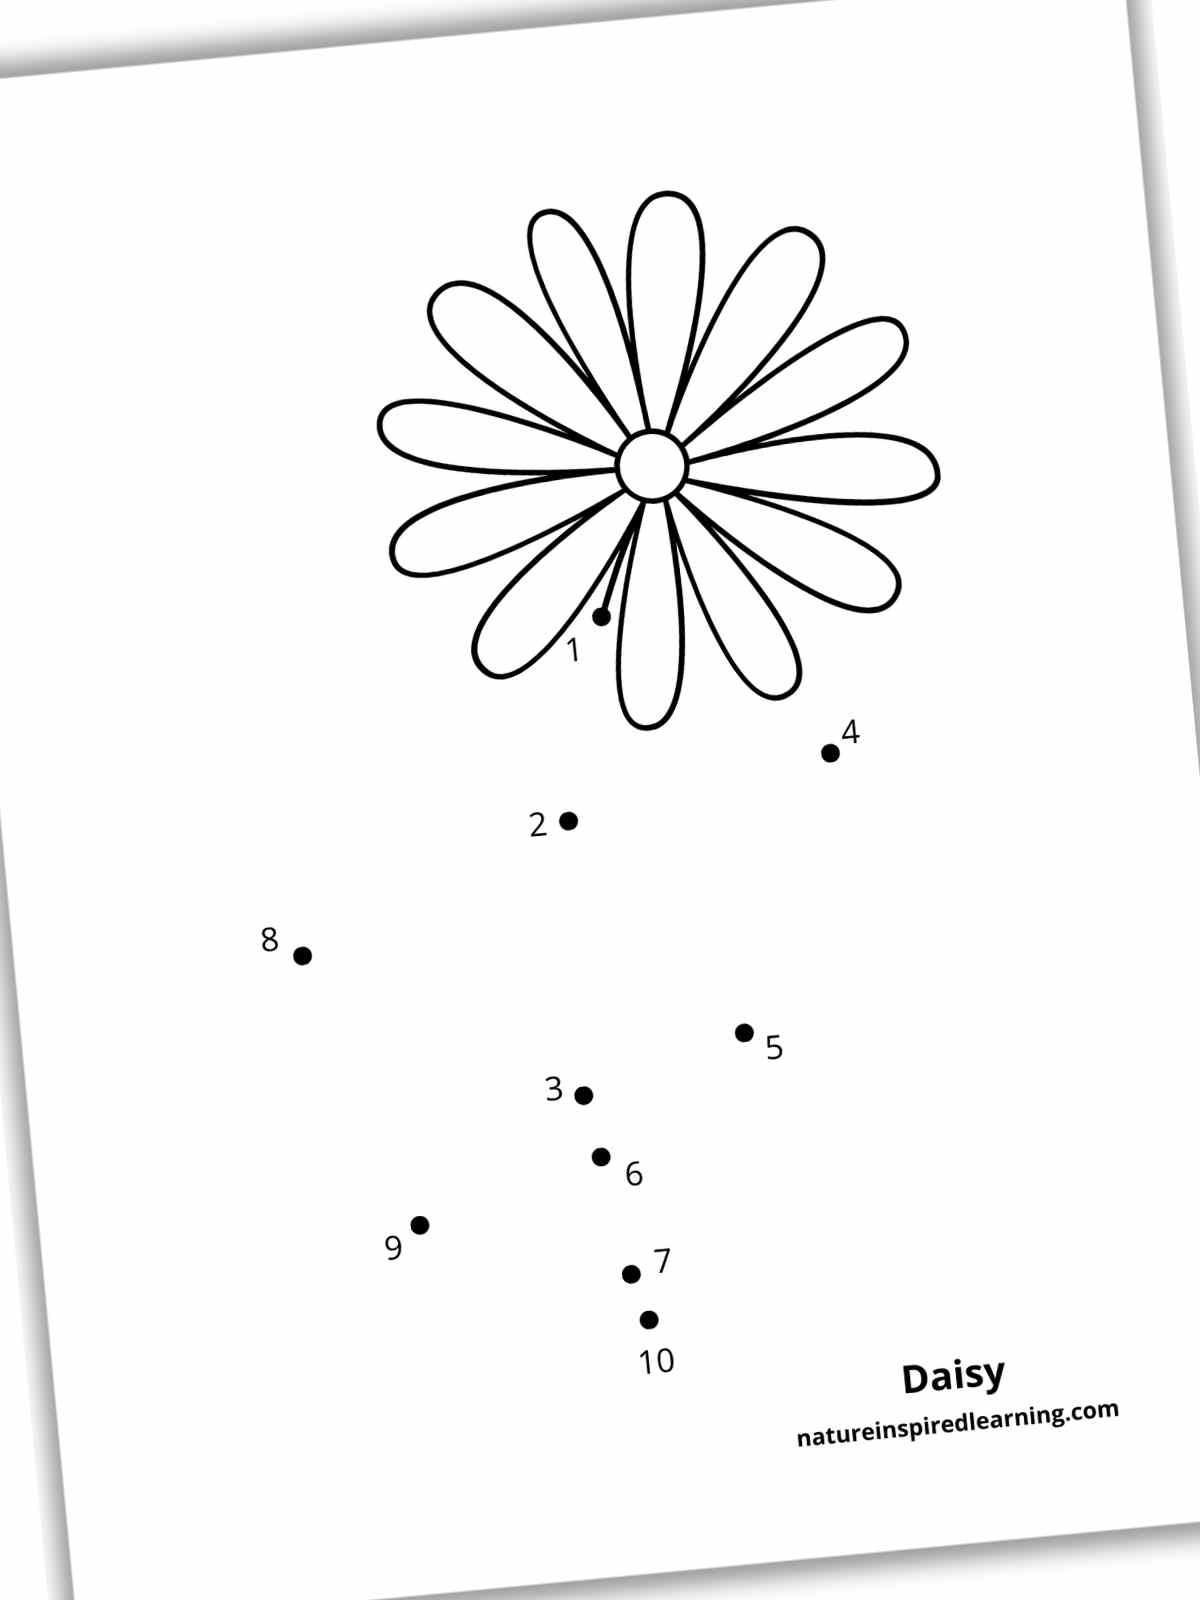 Black and white dot to dot worksheet with a daisy at the top and a missing stem. Numbers 1-10 next to dots below the flower.